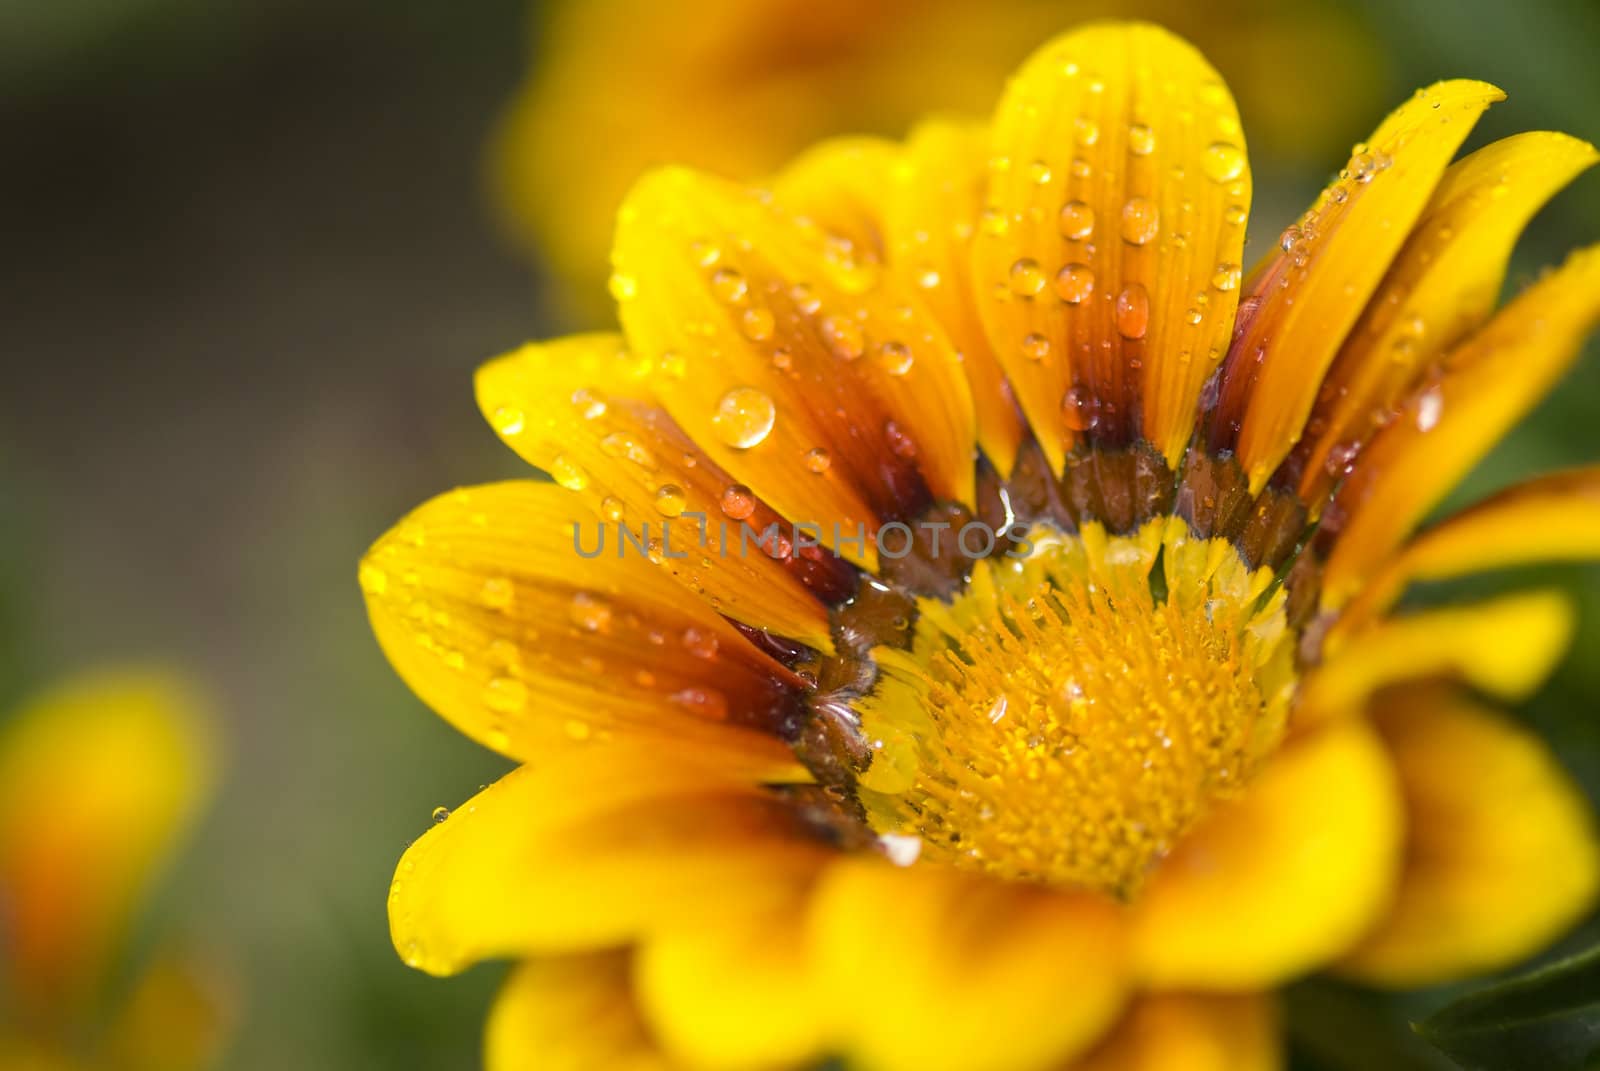 Yellow flower framed on the right, covered in droplets